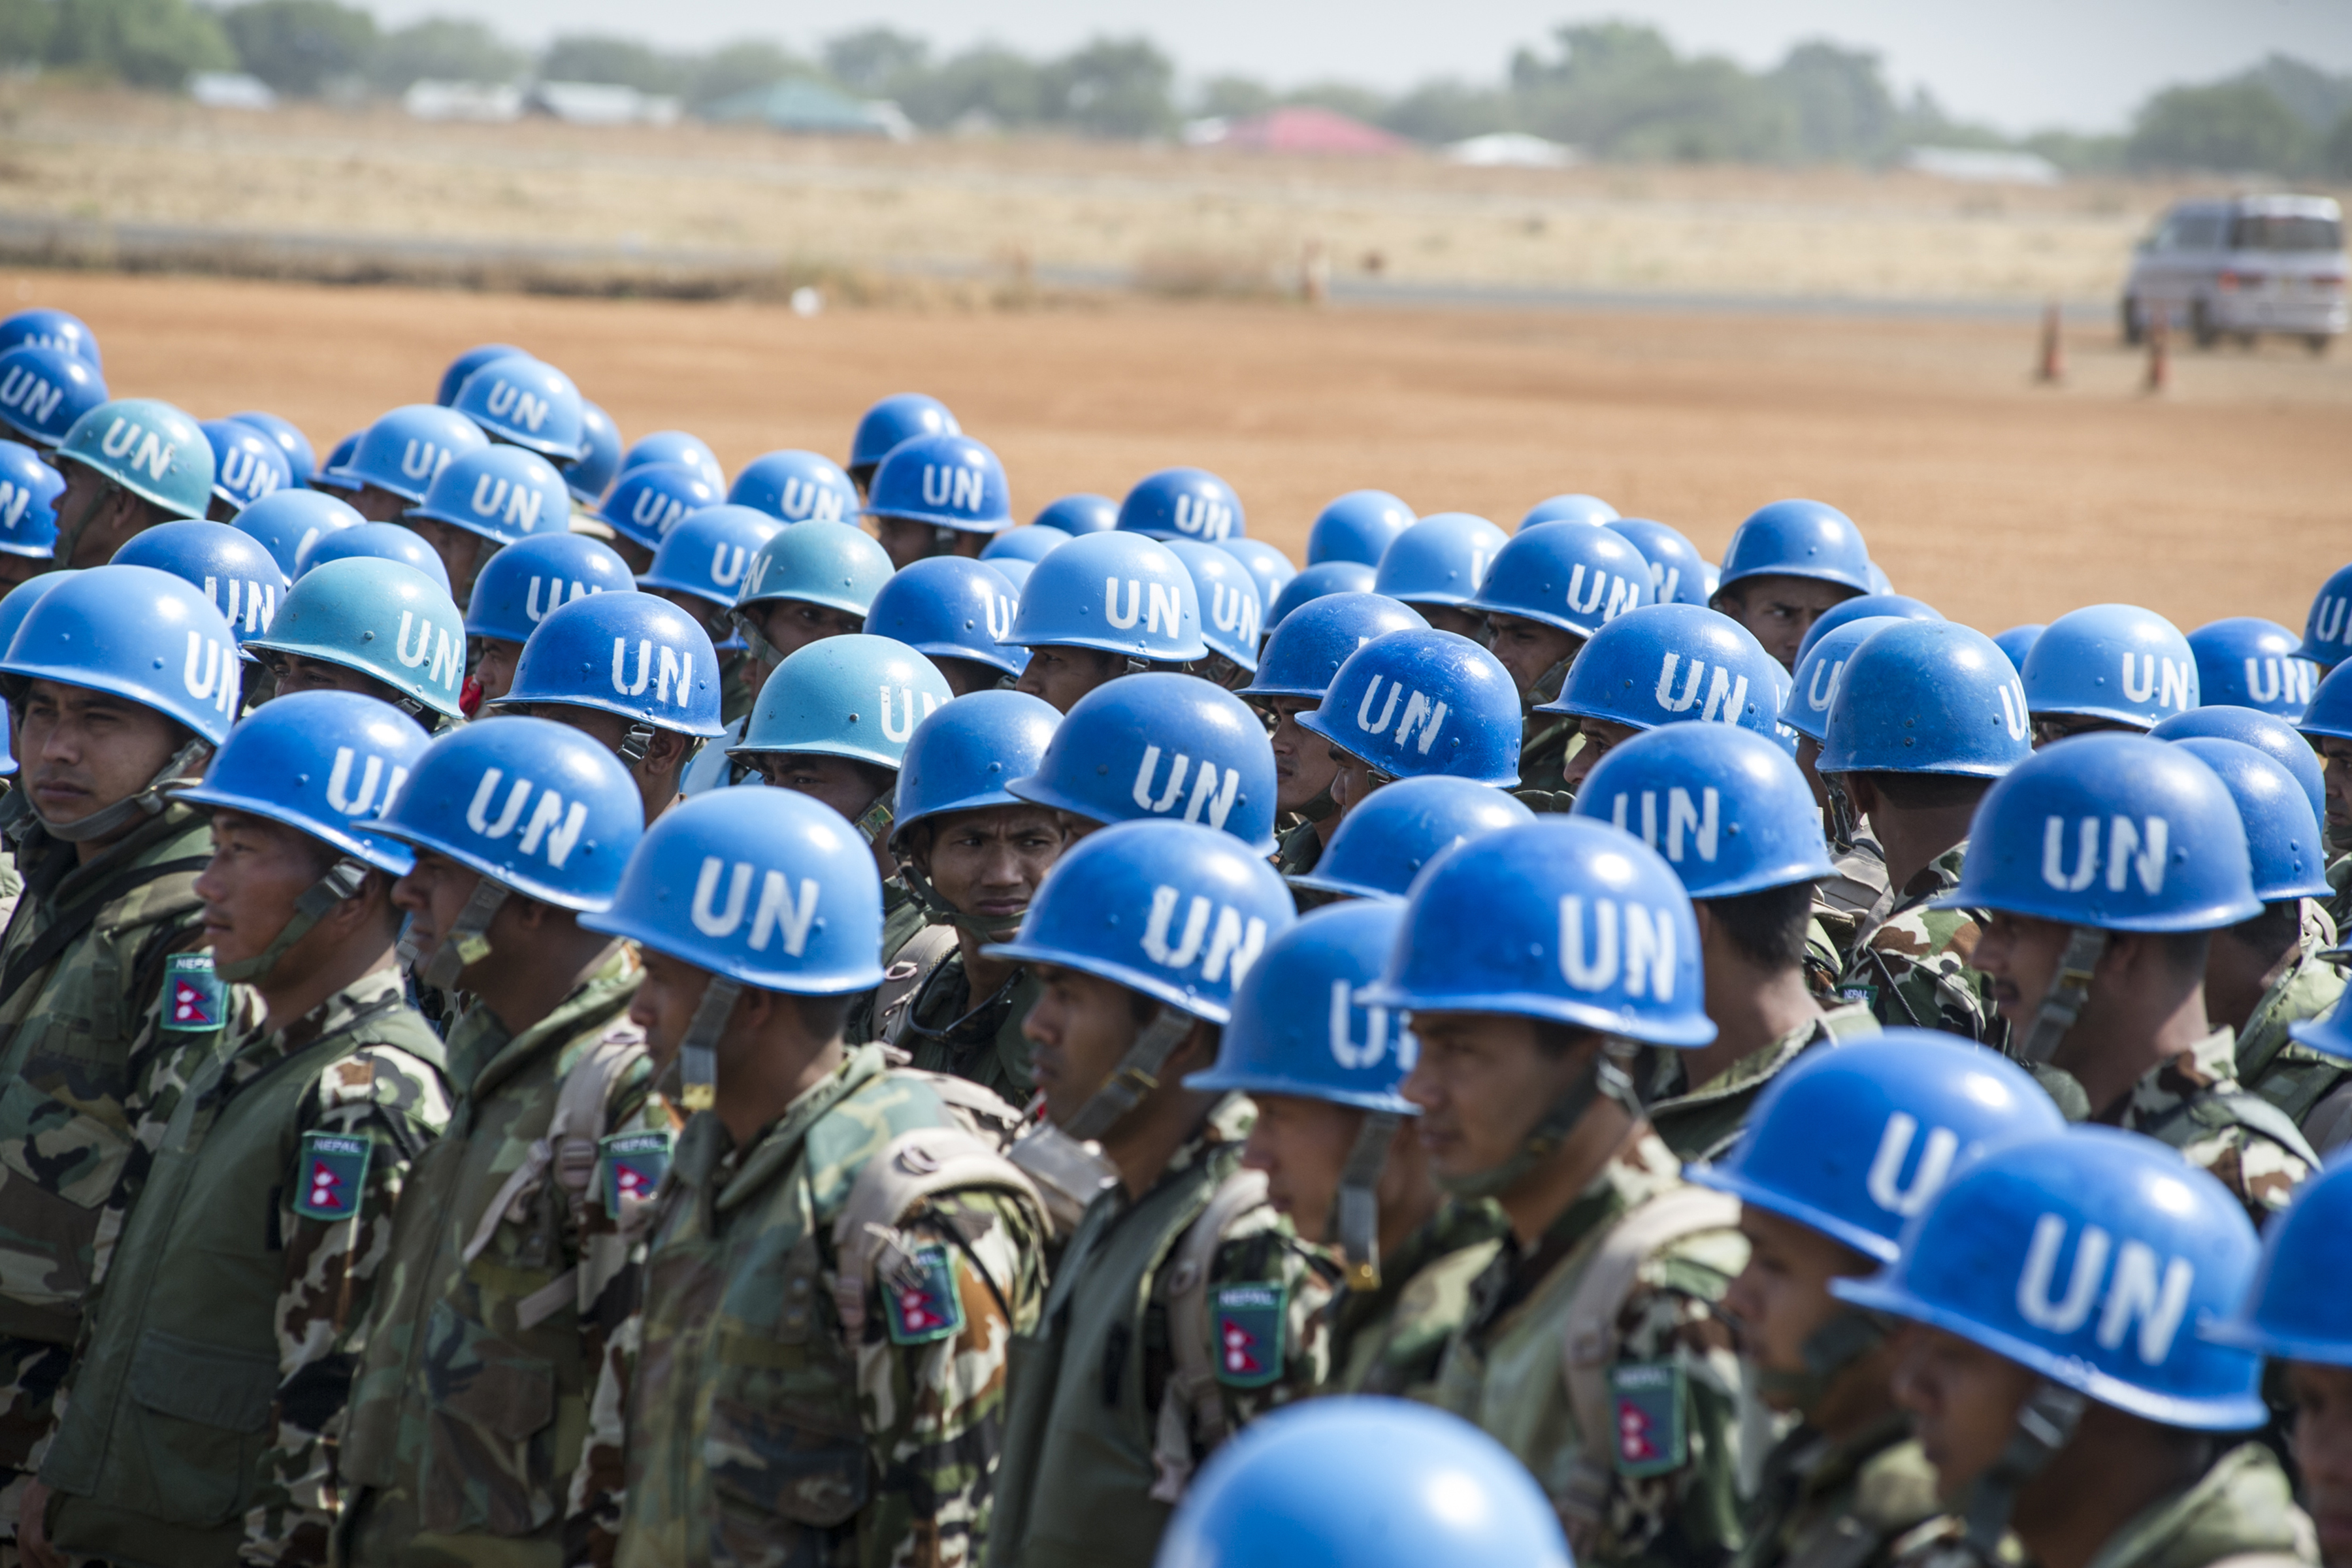 Nepal Army  personnel currently serving in UN peace missions cross 6,000-mark